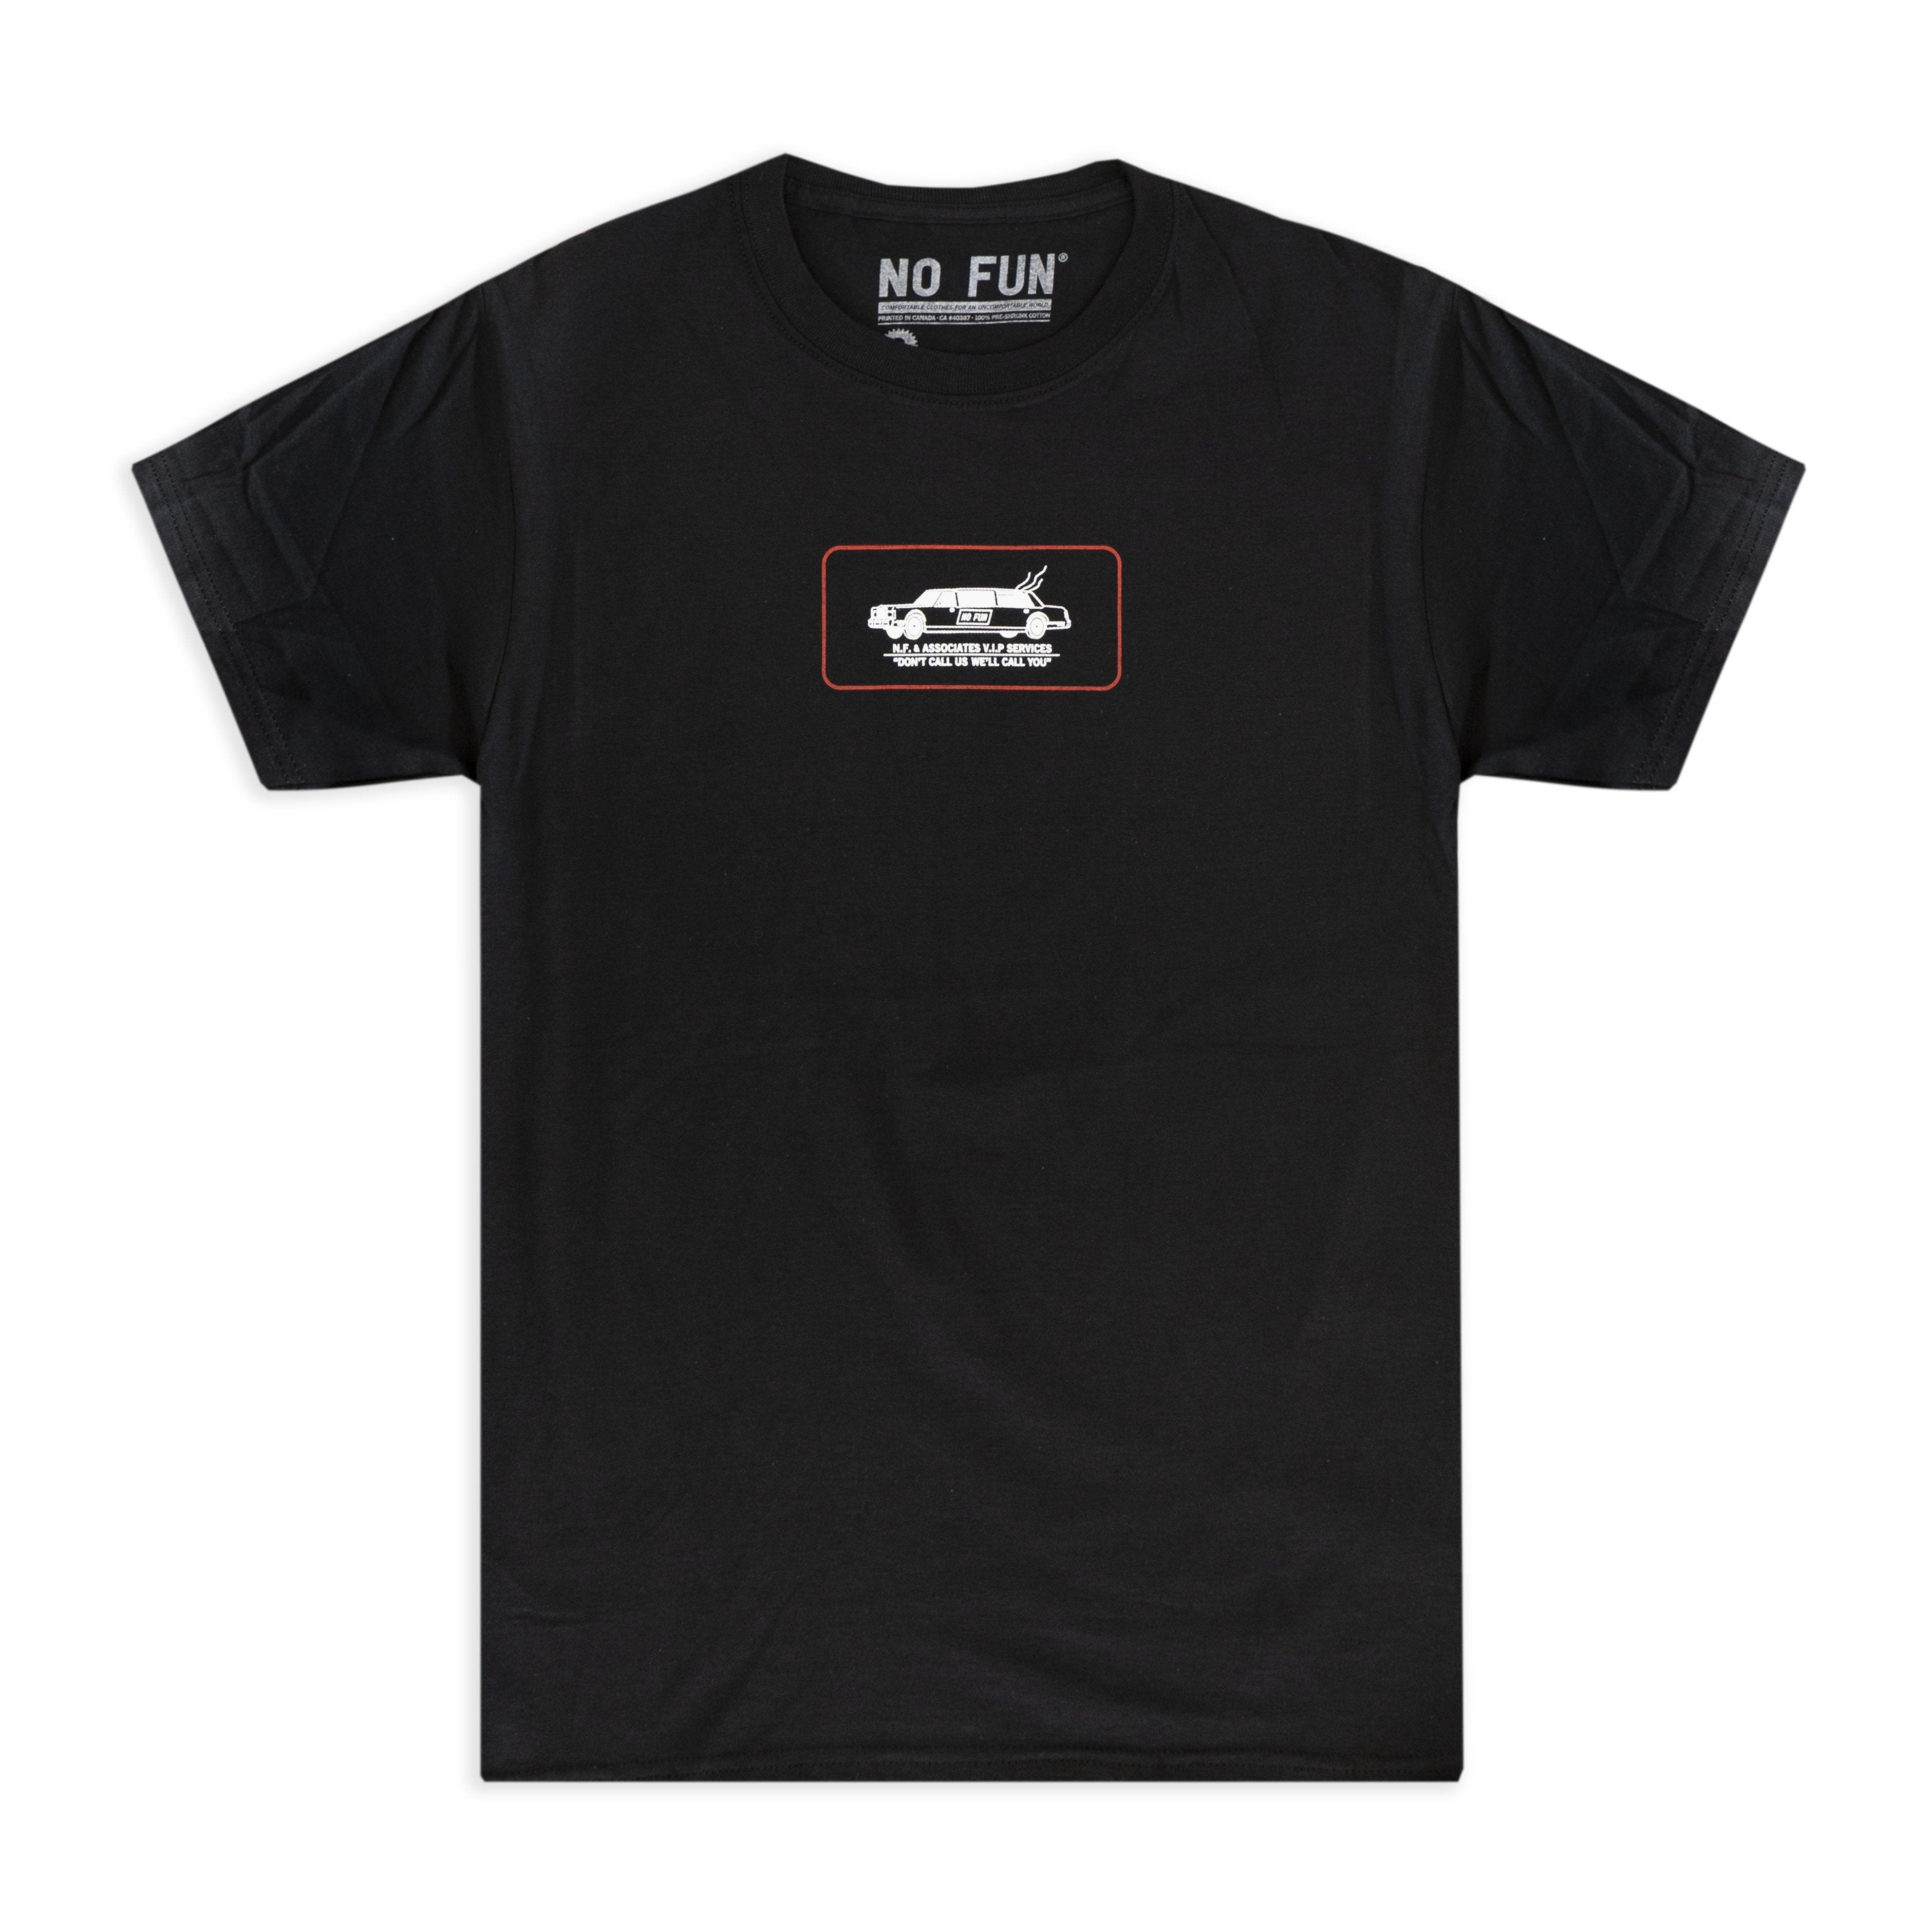 Black t-shirt with a chest print. Print is a drawing of a limo with smoke coming out of it, sized ~4" wide. Text underneath the car says "Don't call us, we'll call you".